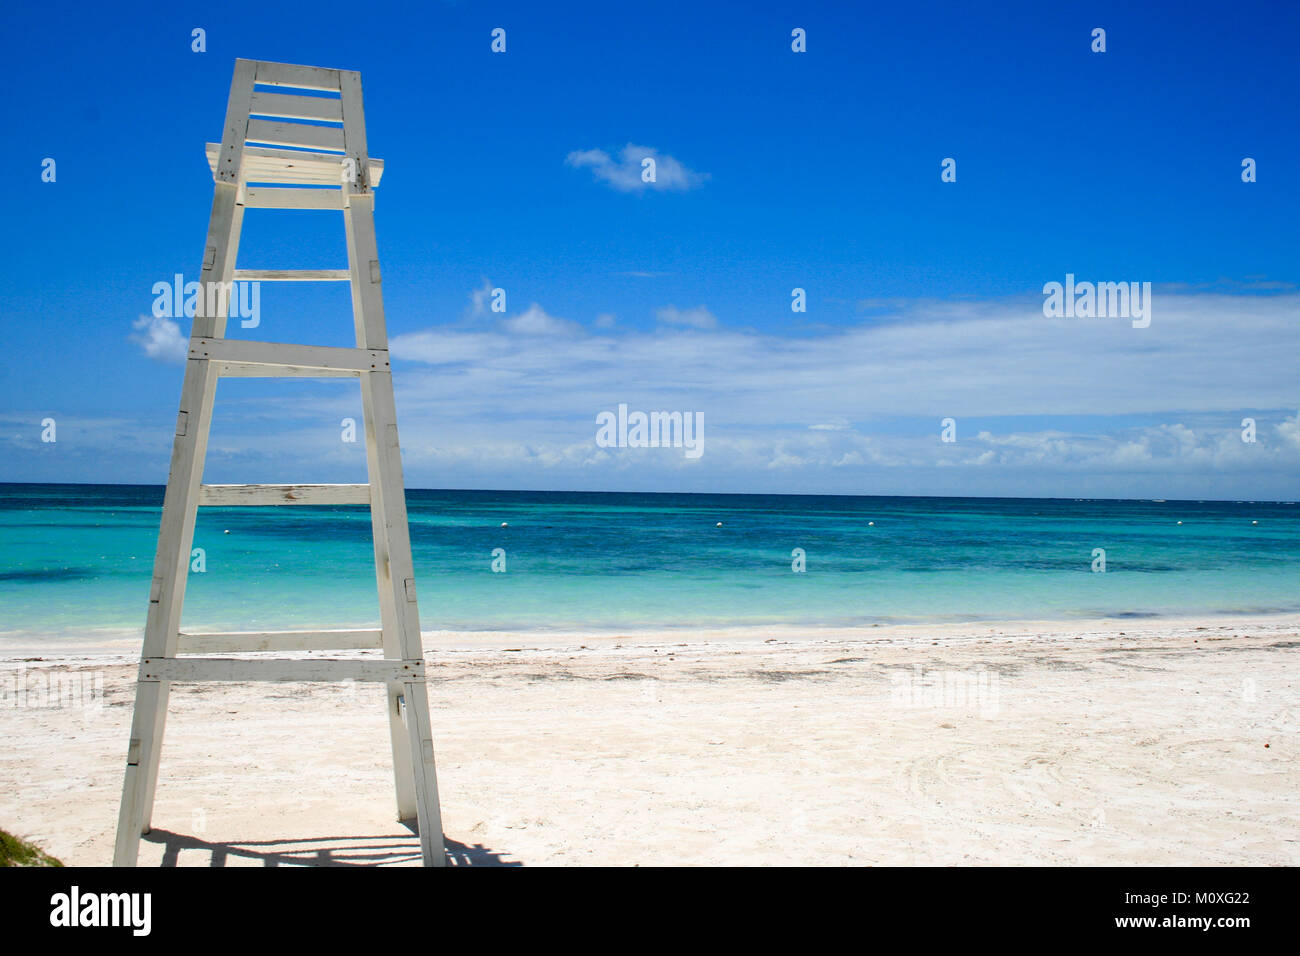 Lifeguard tower on tropical beach in Dominican Republic Stock Photo